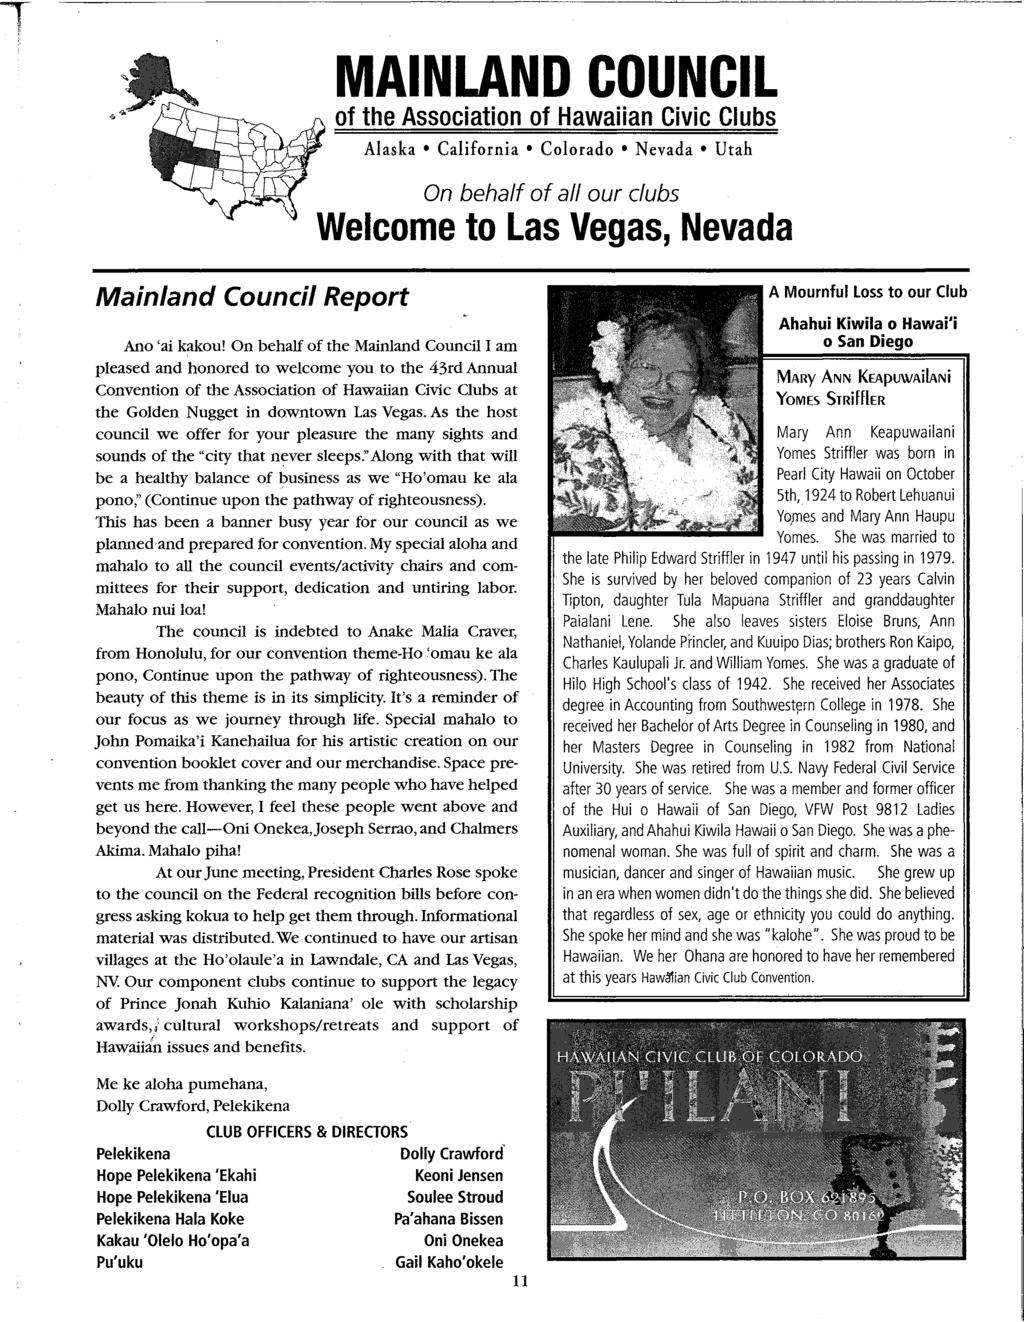 n l' MAINLAND COUNCIL of the Association of Hawaiian Civic Clubs Alaska- California - Colorado - Nevada - Utah On behalf of all our clubs Welcome to Las Vegas, Nevada Mainland Council Report Ano 'ai